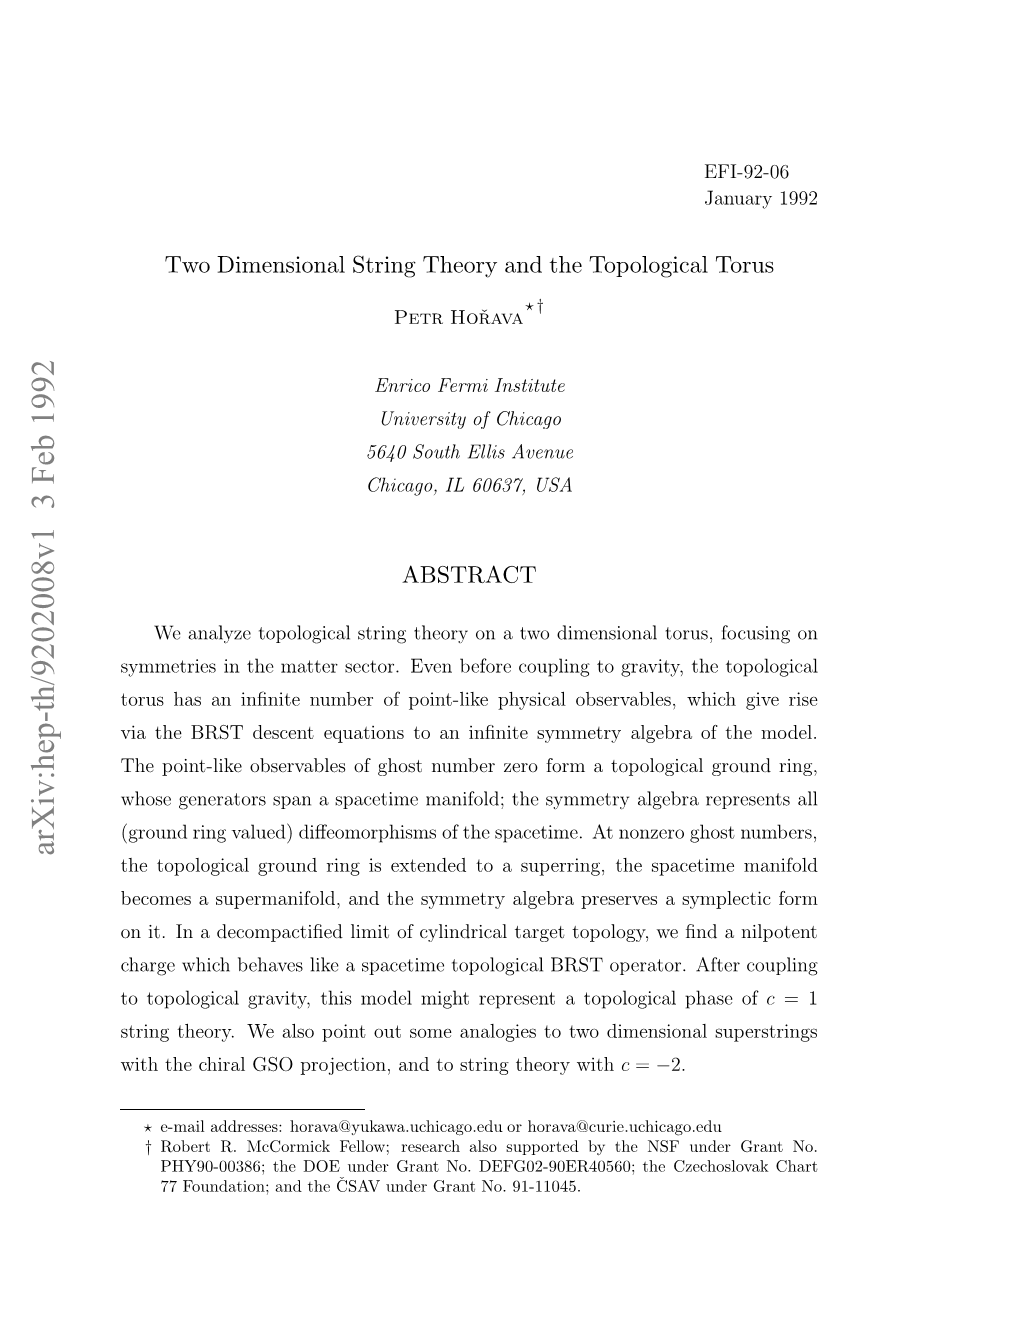 Two Dimensional String Theory and the Topological Torus